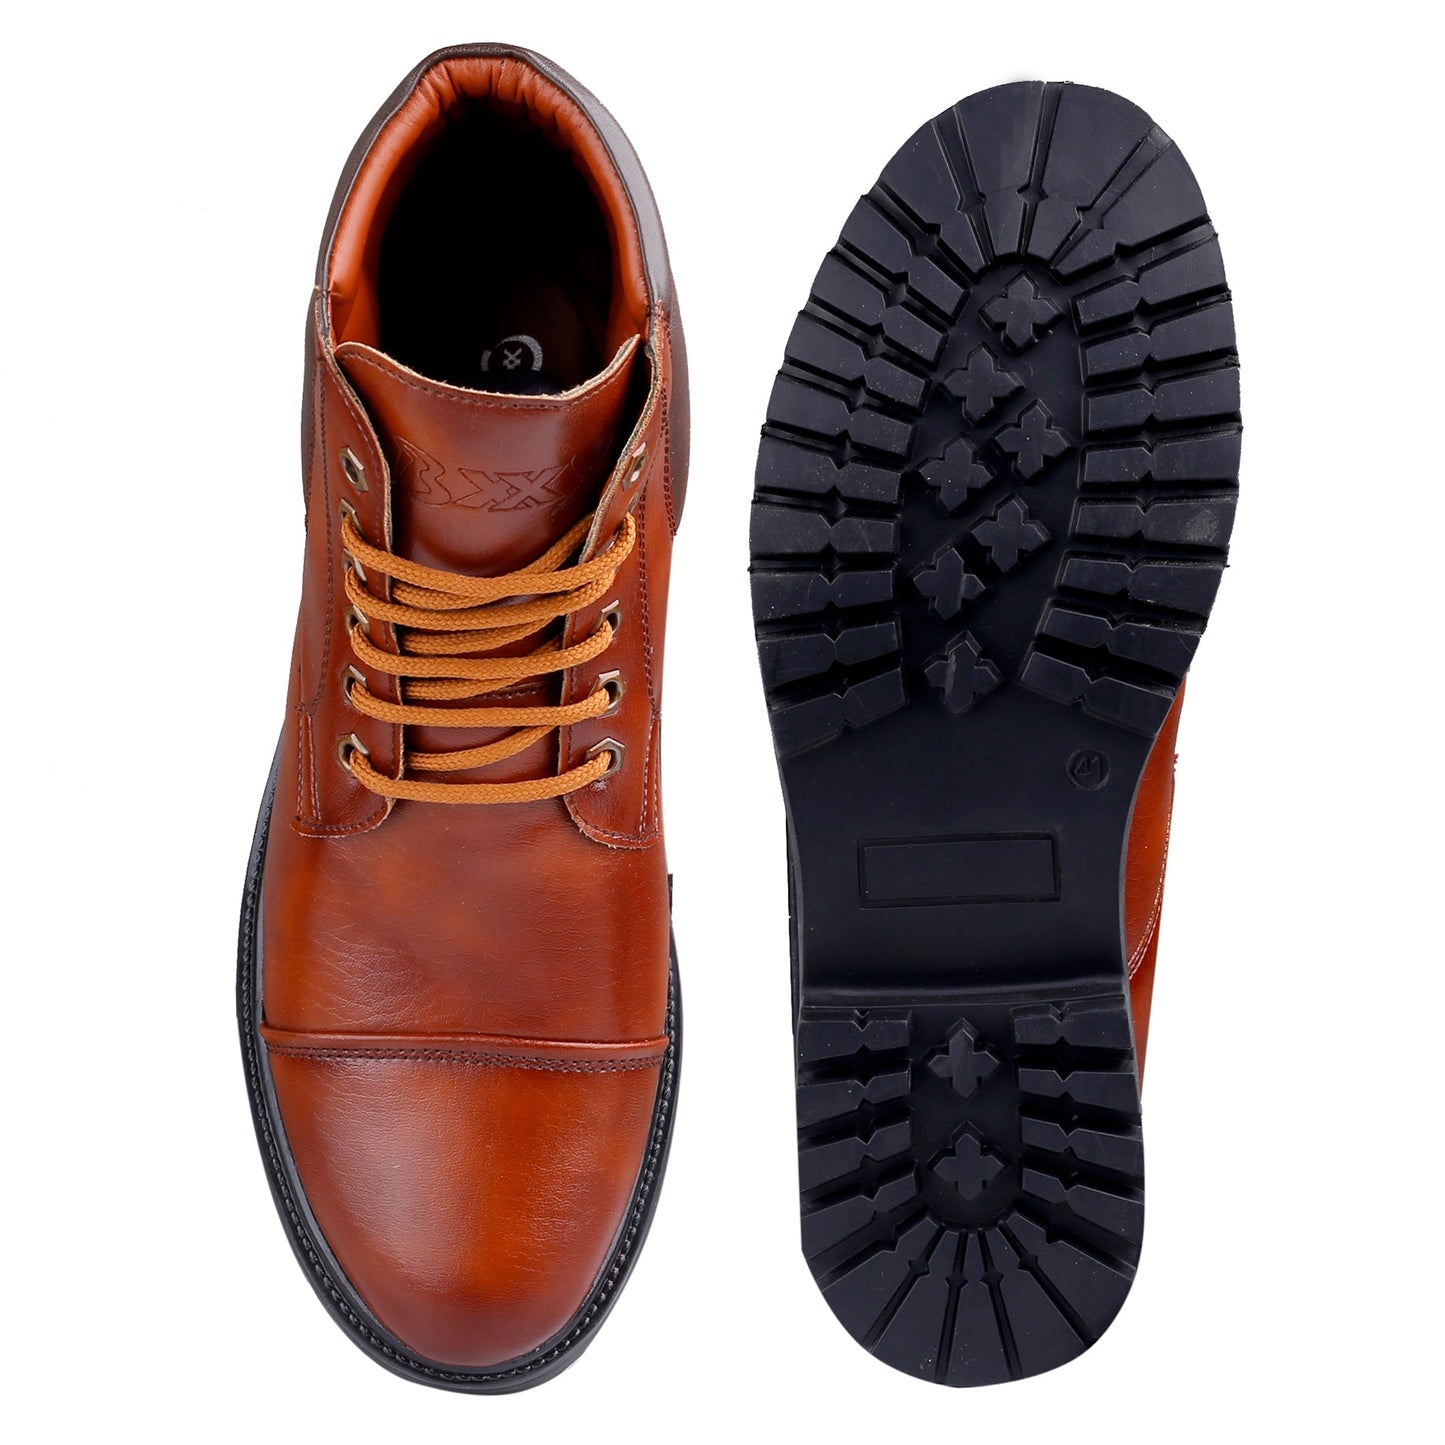 Bxxy's Lace-up Ankle Stylish Boots for Men